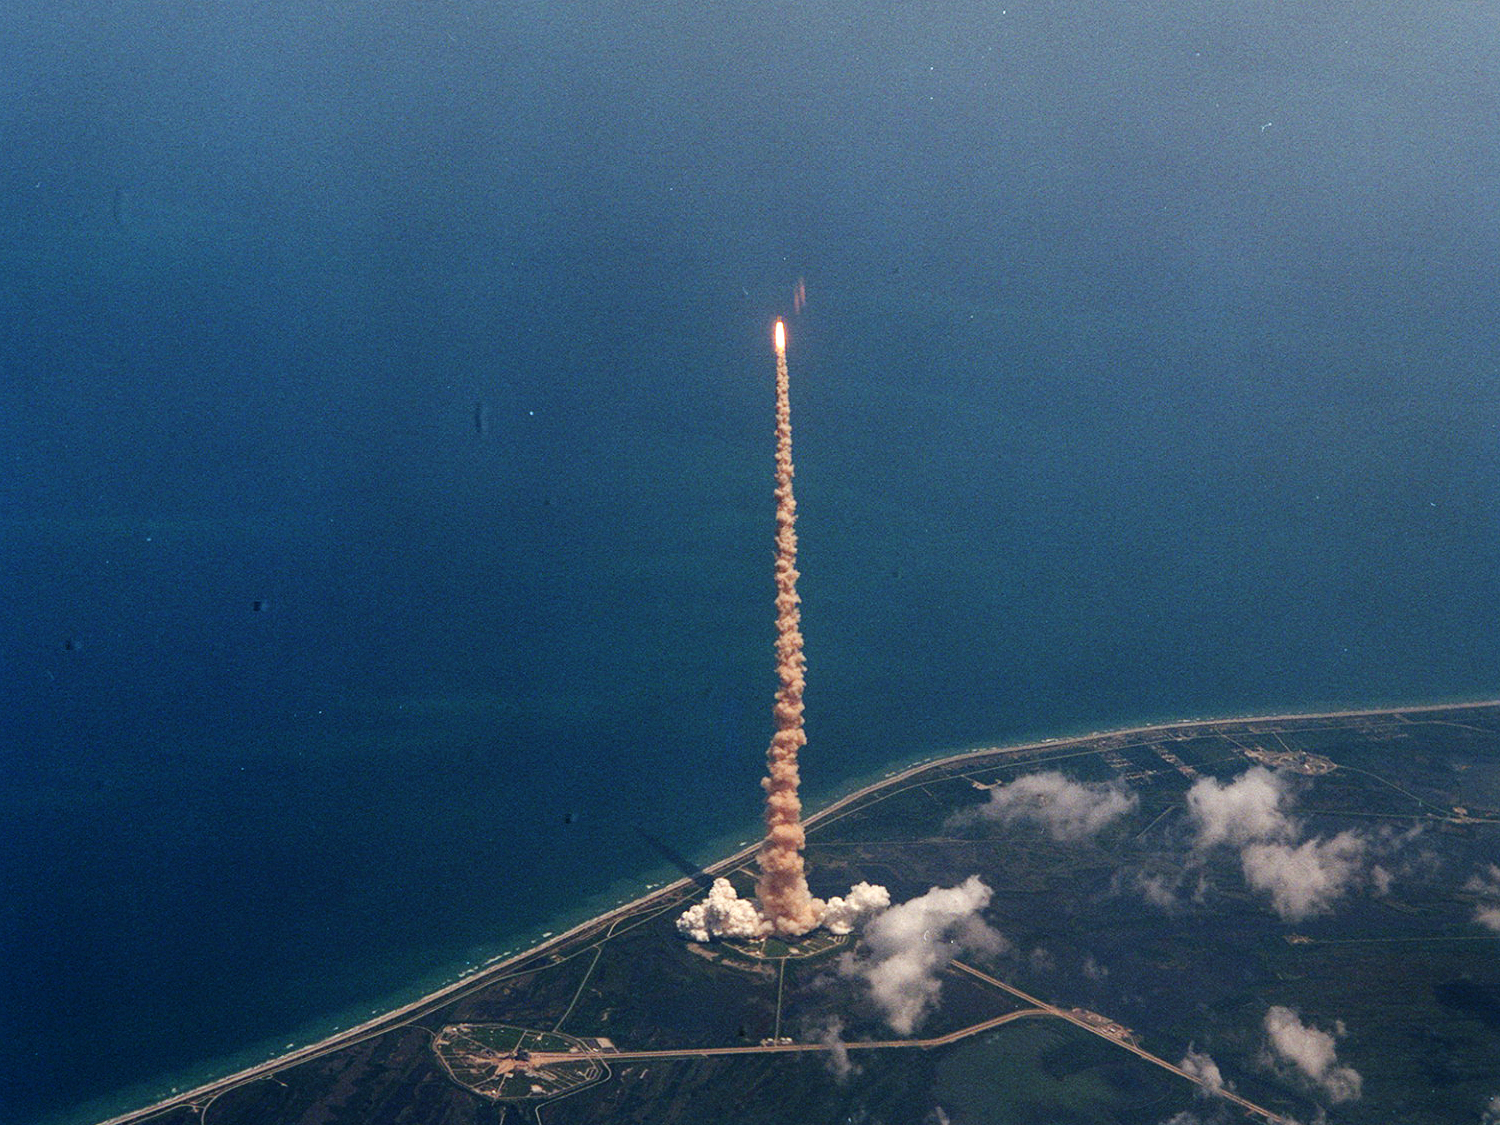  View of STS-94 launch taken from the Shuttle Training Aircraft flown by astronaut Ken Cockrell. 